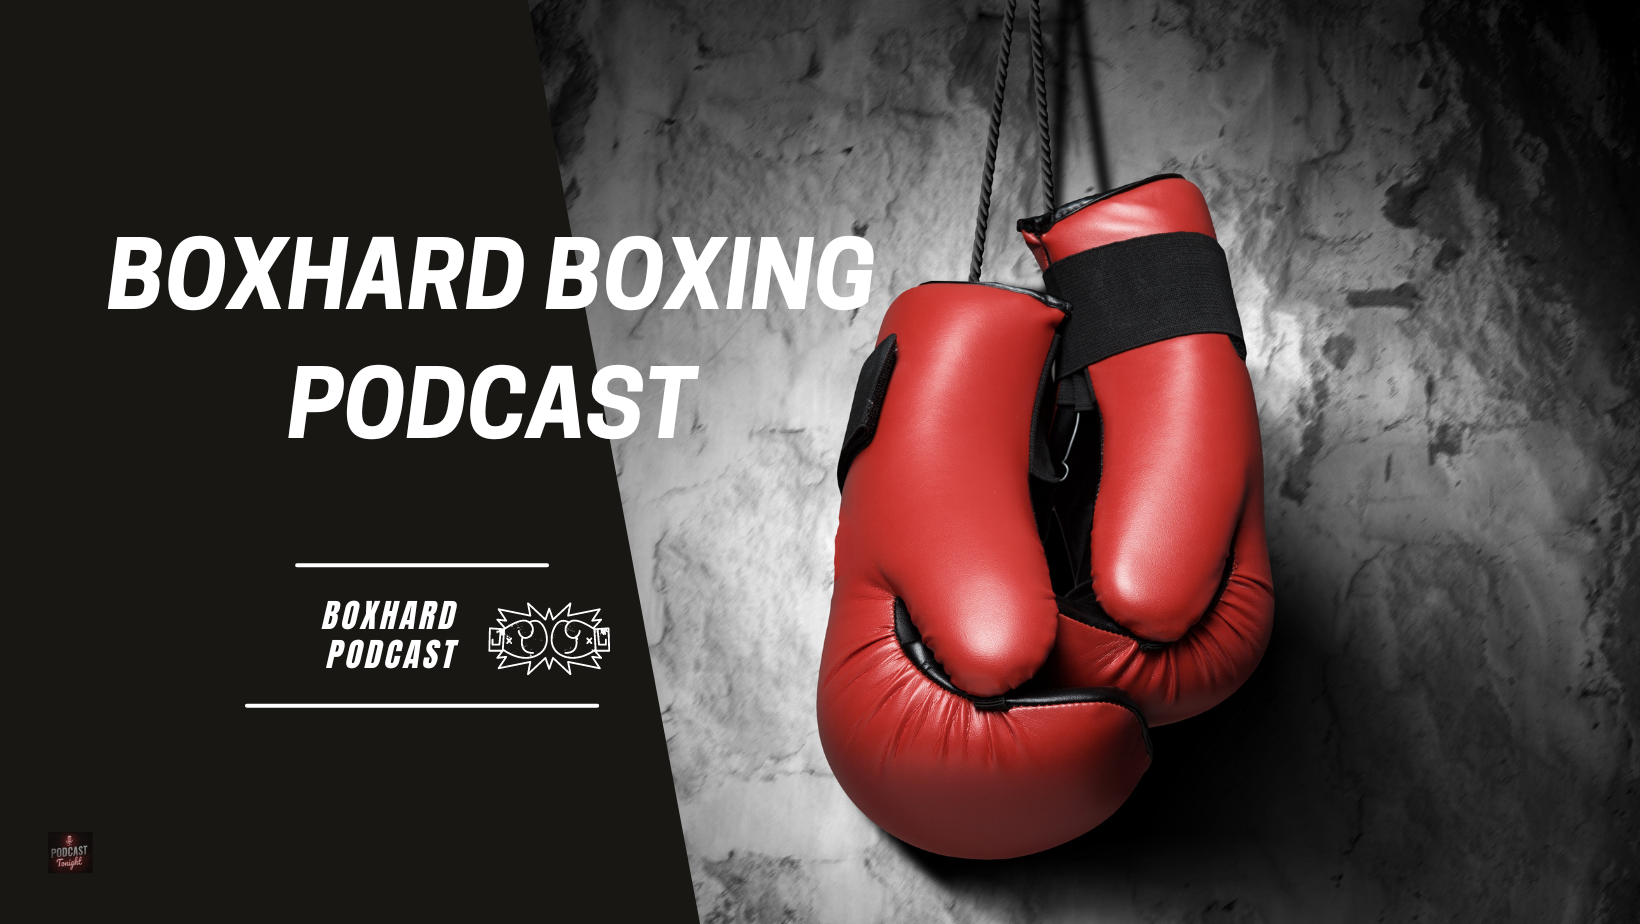 The BoxHard Boxing Podcast – Listen Here